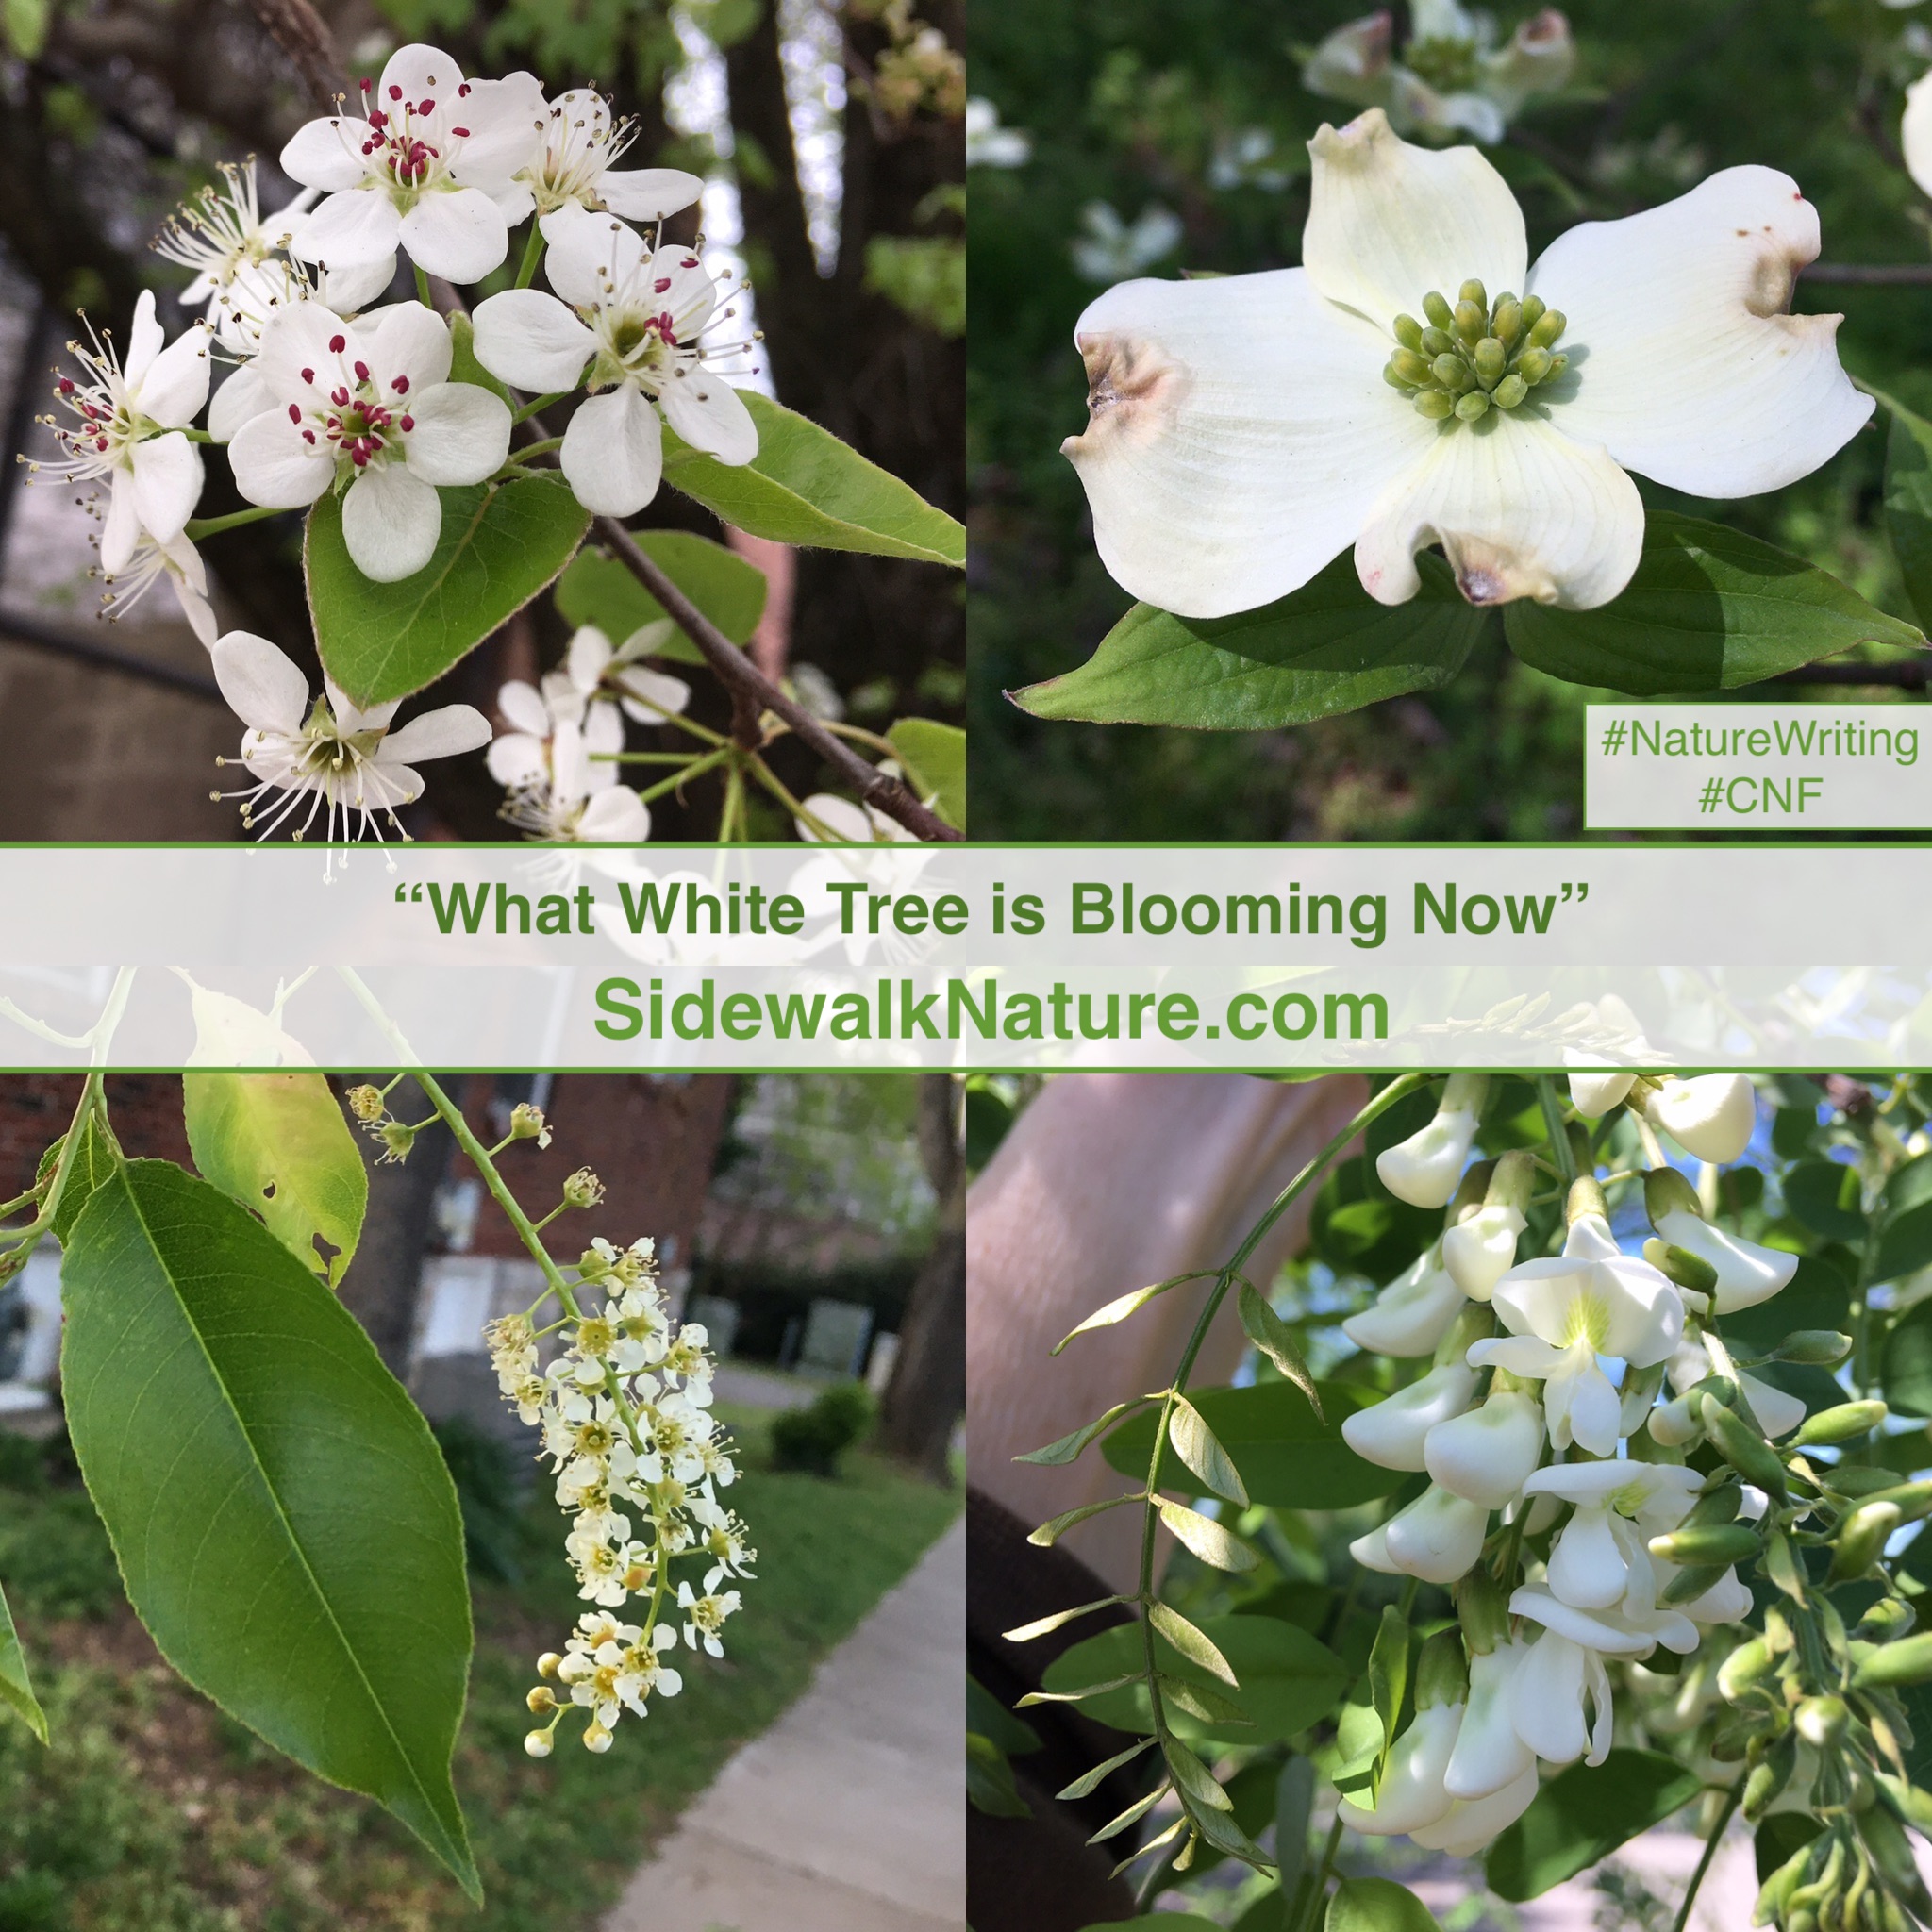 What White Tree is Blooming Now